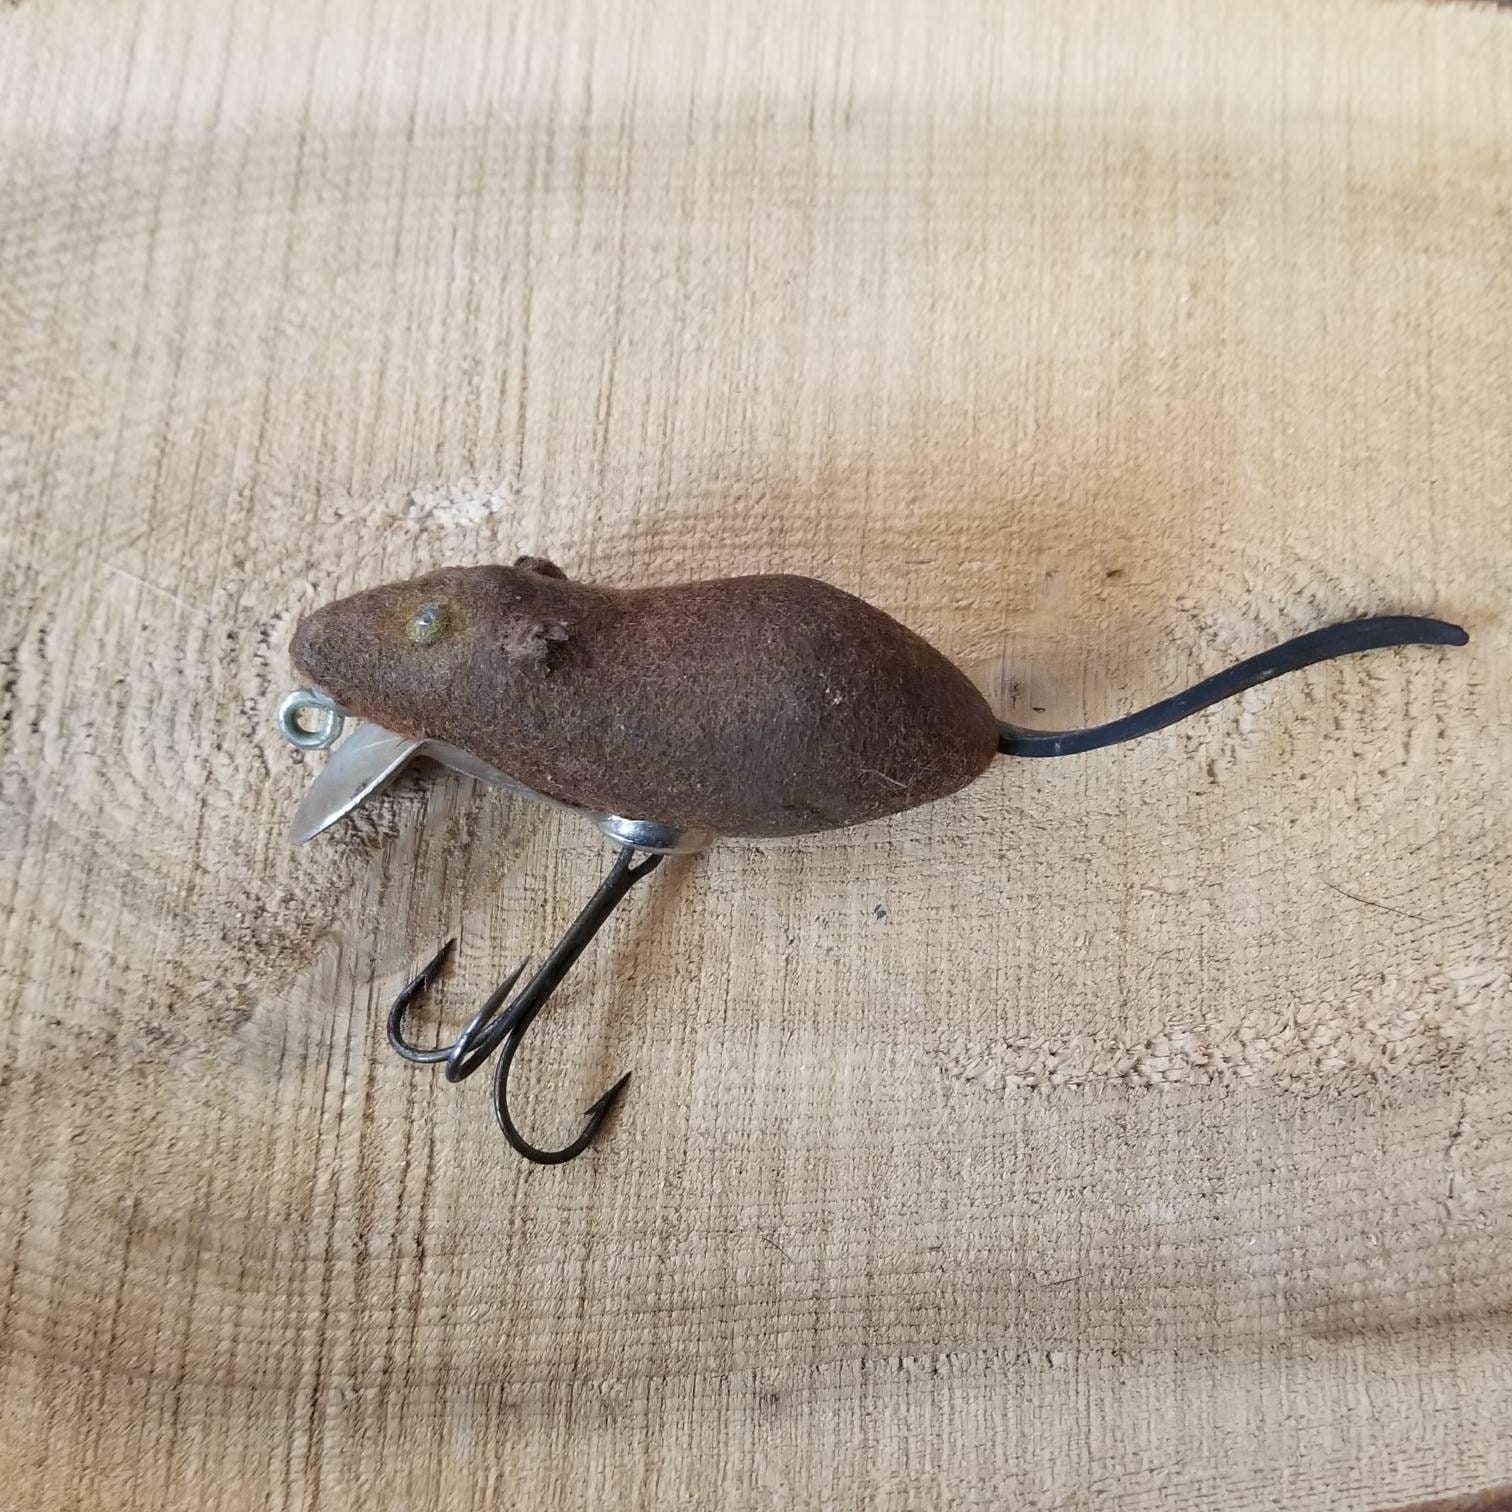 Vintage Shakespeare Grumpy and Paw Paw Flocked Mouse Fishing Lures